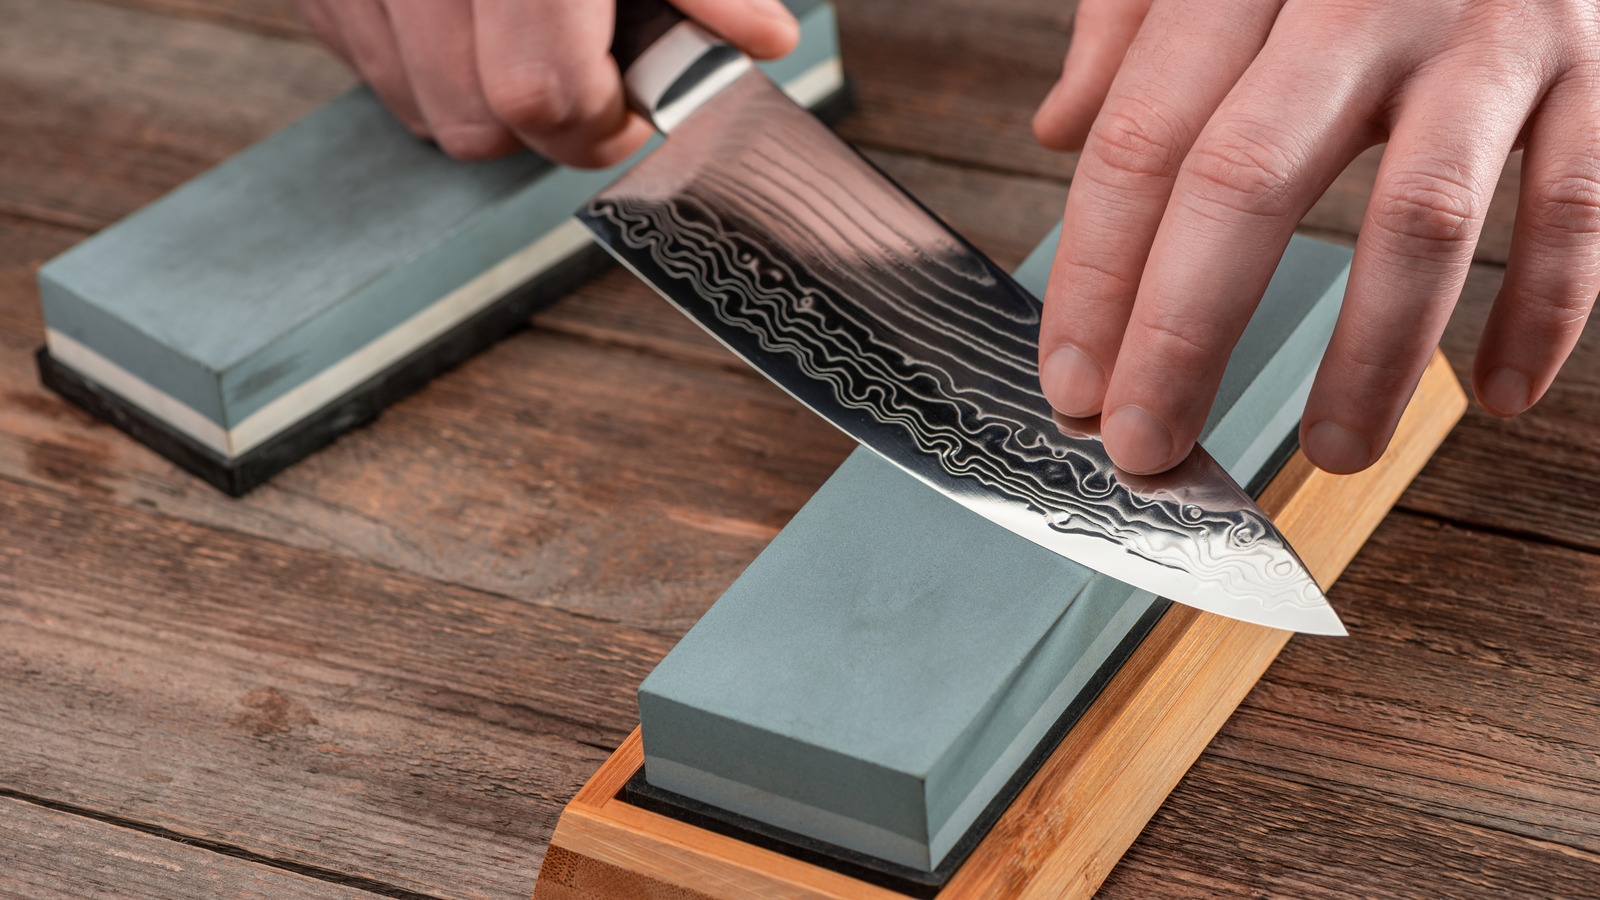 How to Sharpen a Knife on a Wet Stone - How to Get an Extremely